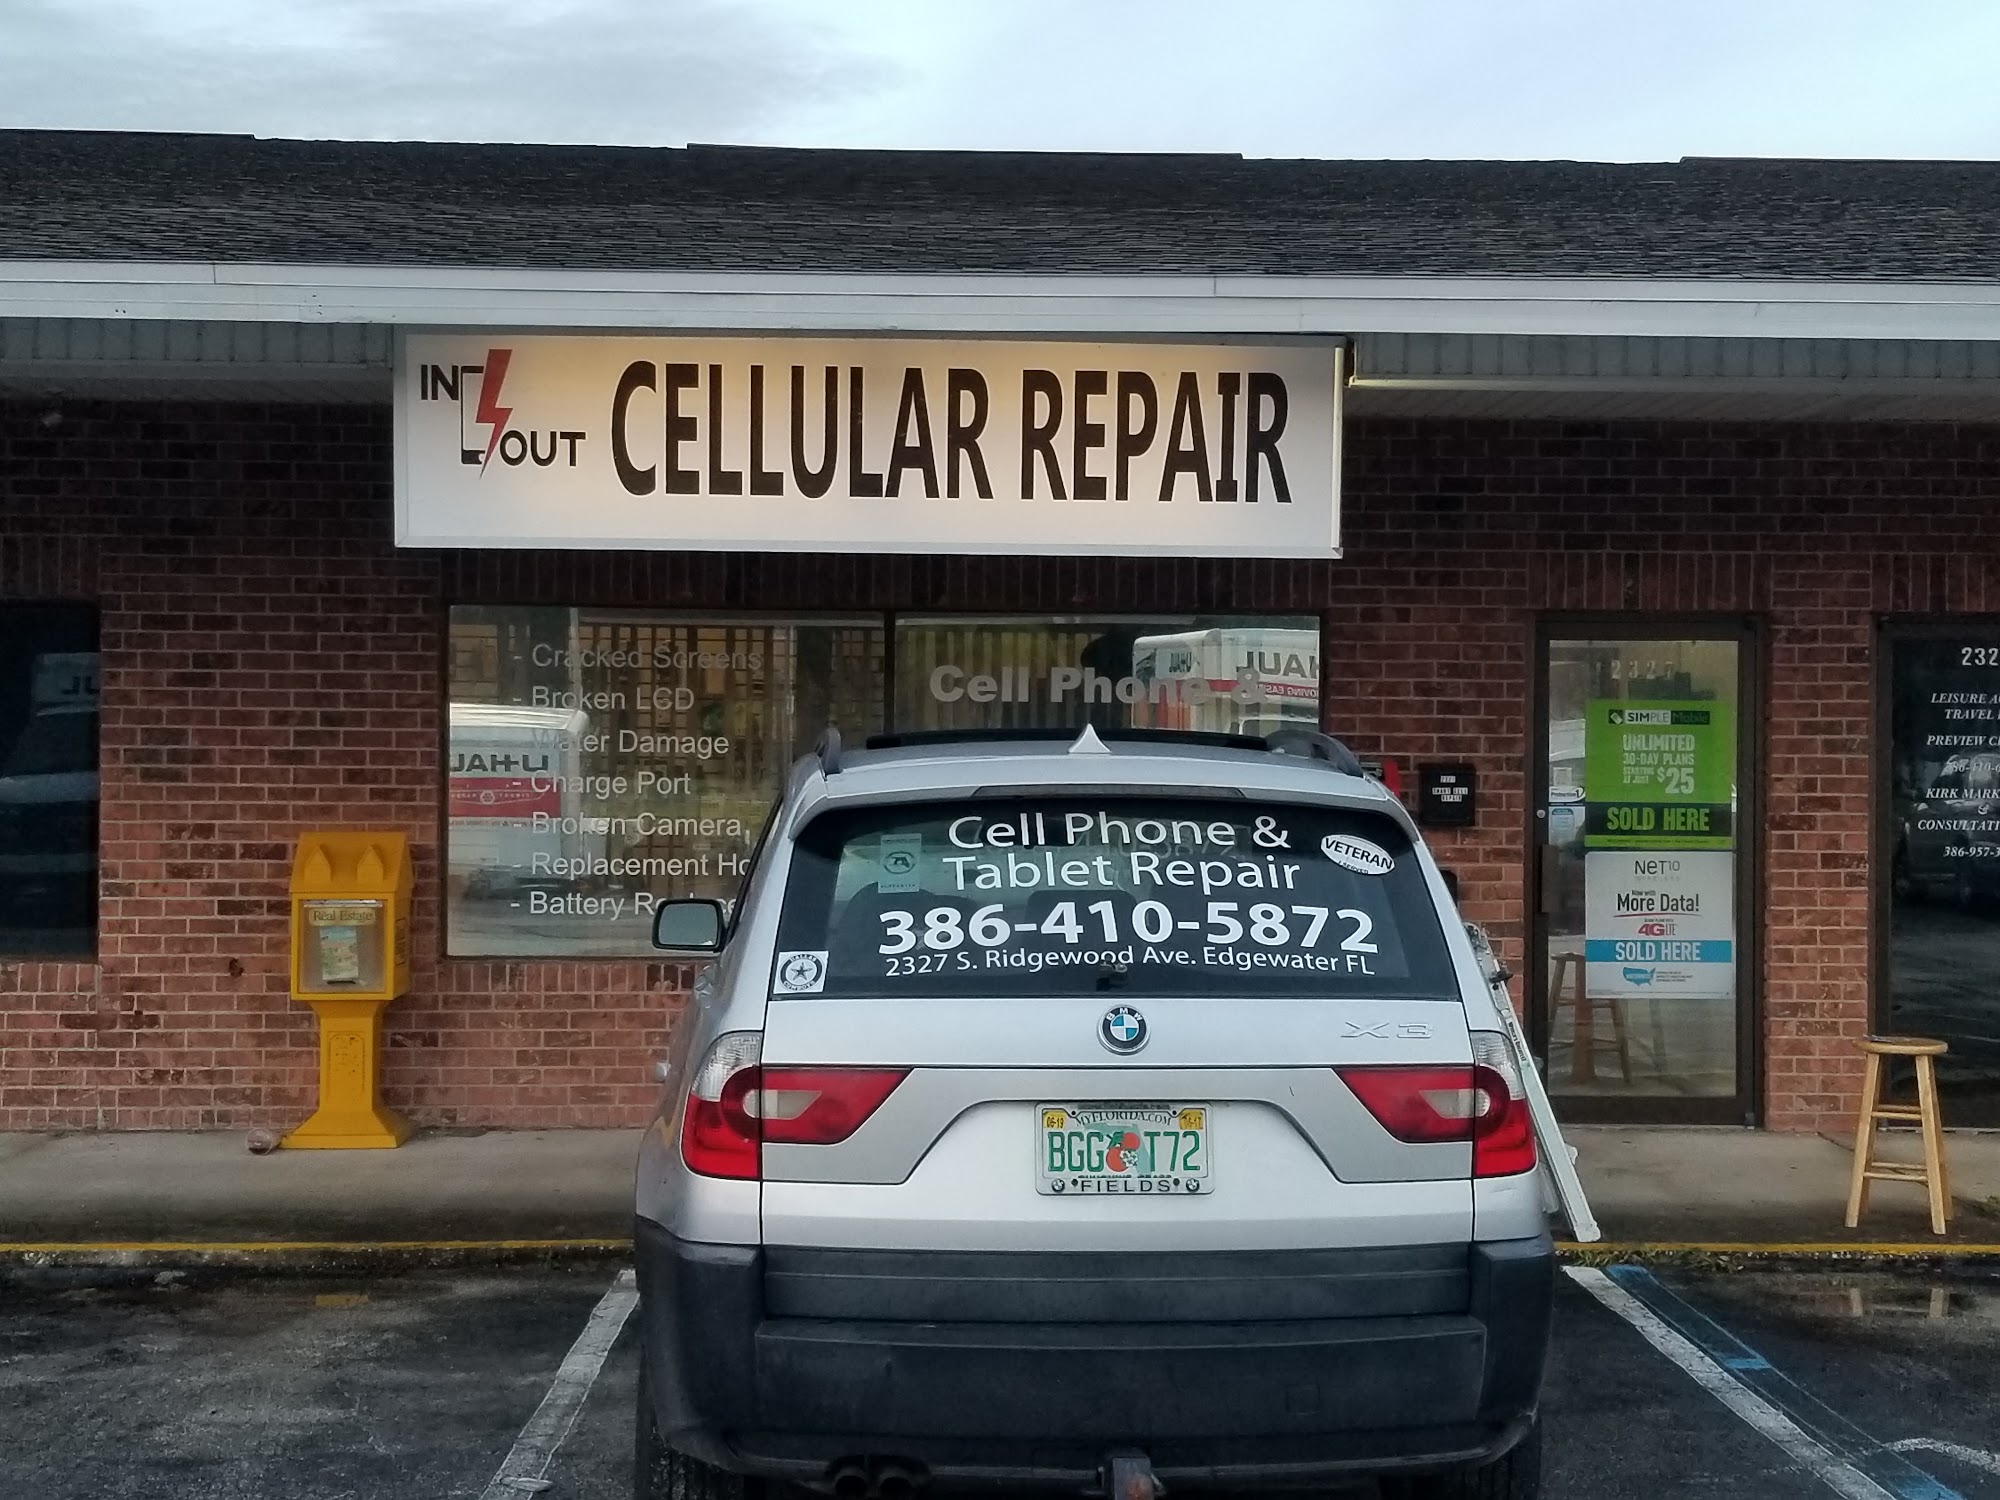 In & Out Cellular Repair